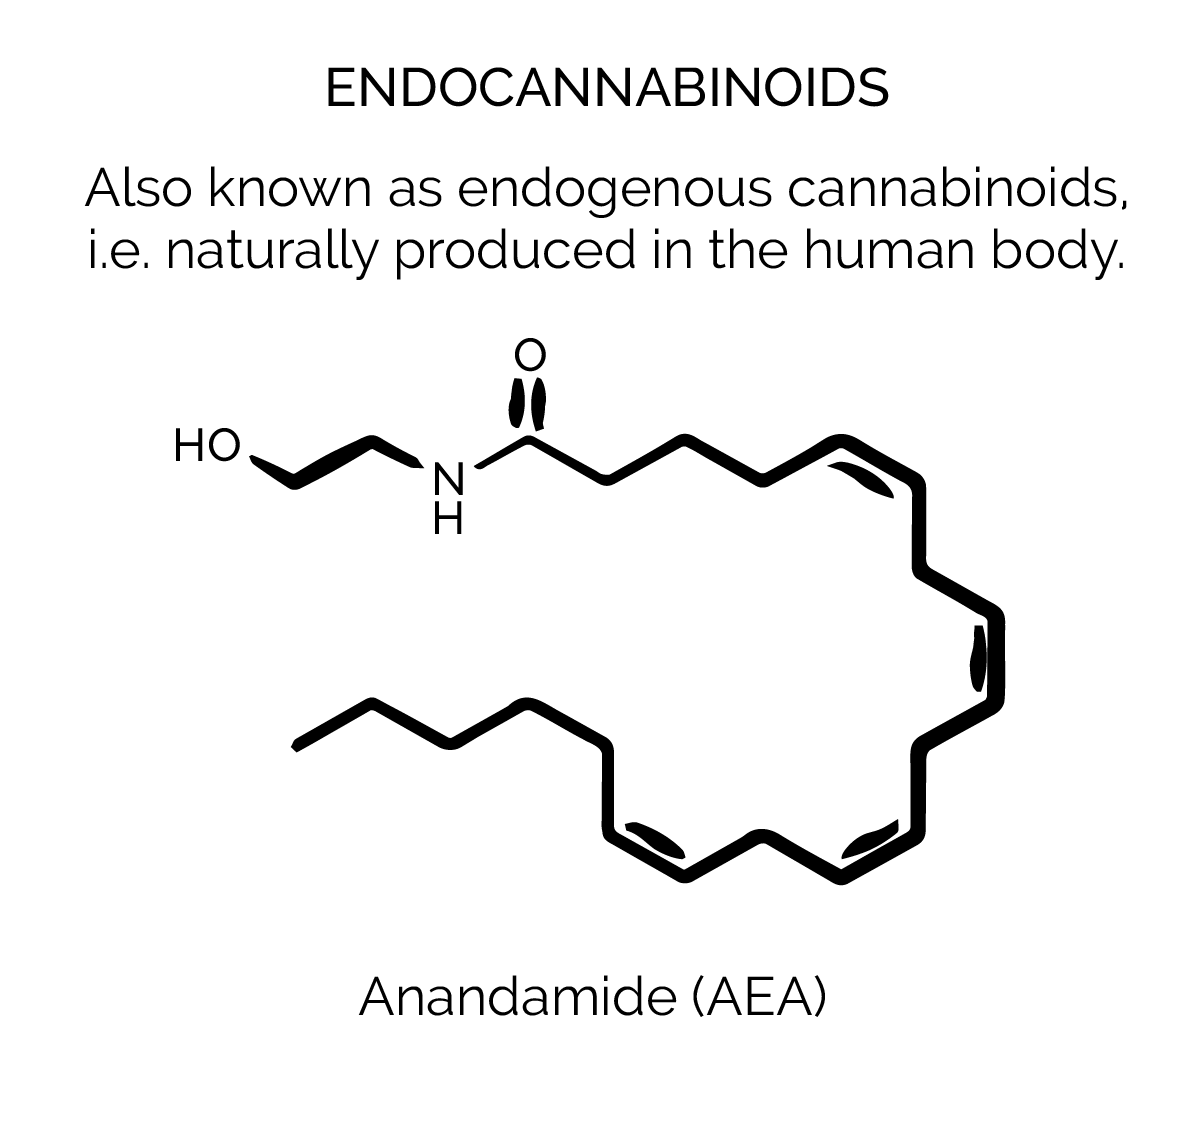 The chemical structure for Anadamide AEA